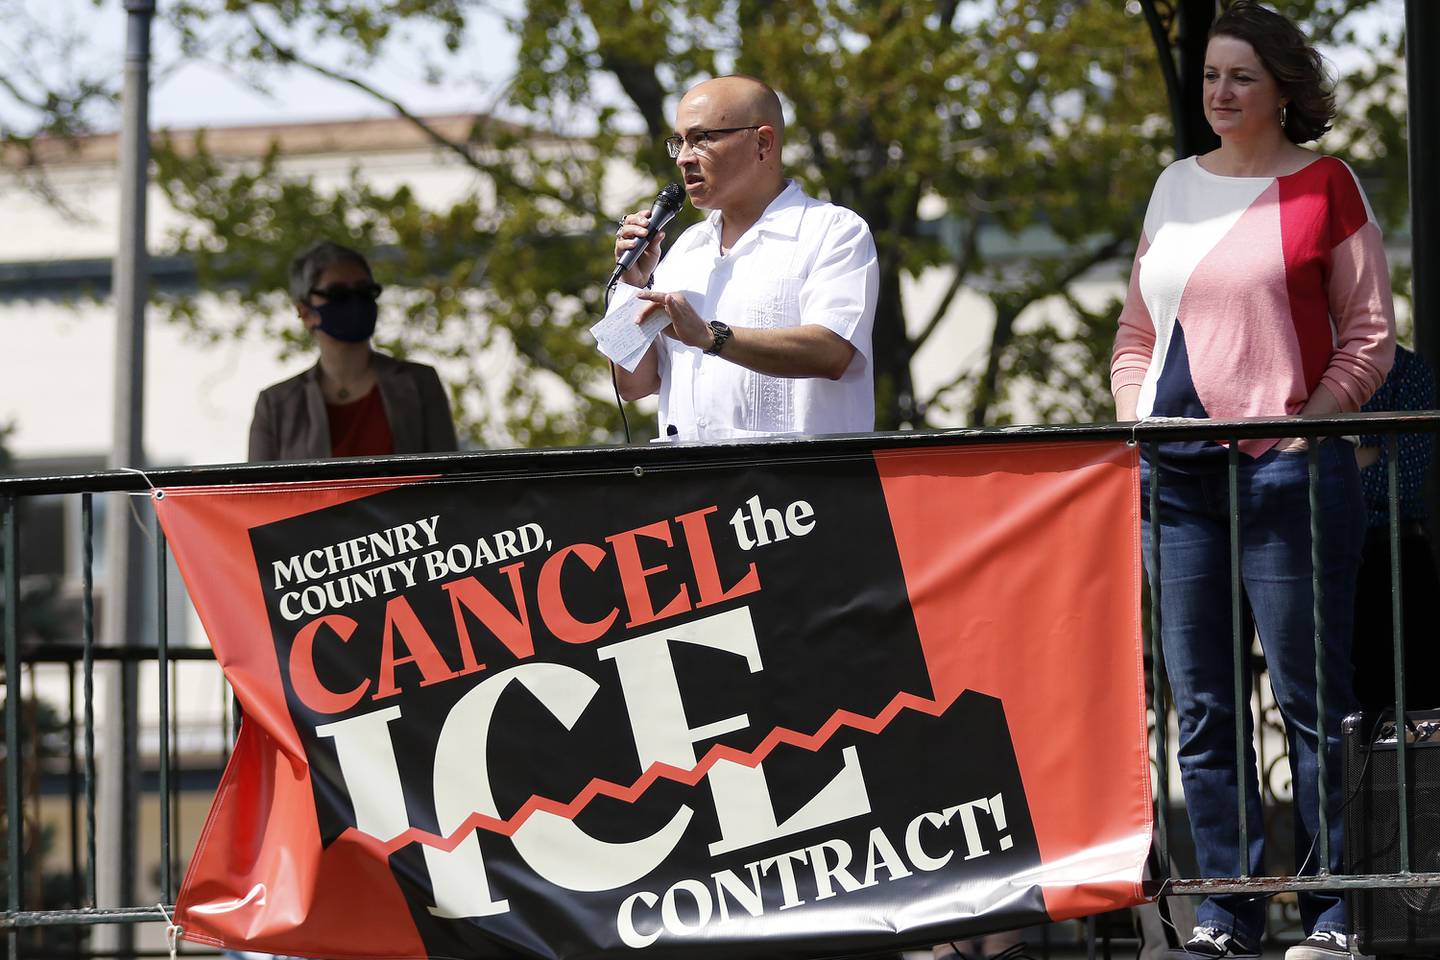 McHenry County board members Carlos Acosta, center, and Kelli Wegener, right, speak to a crowd of approximately 80 attendees at a rally to end McHenry County's contract with U.S. Immigration and Customs Enforcement on Saturday, May 1, 2021 in Woodstock.